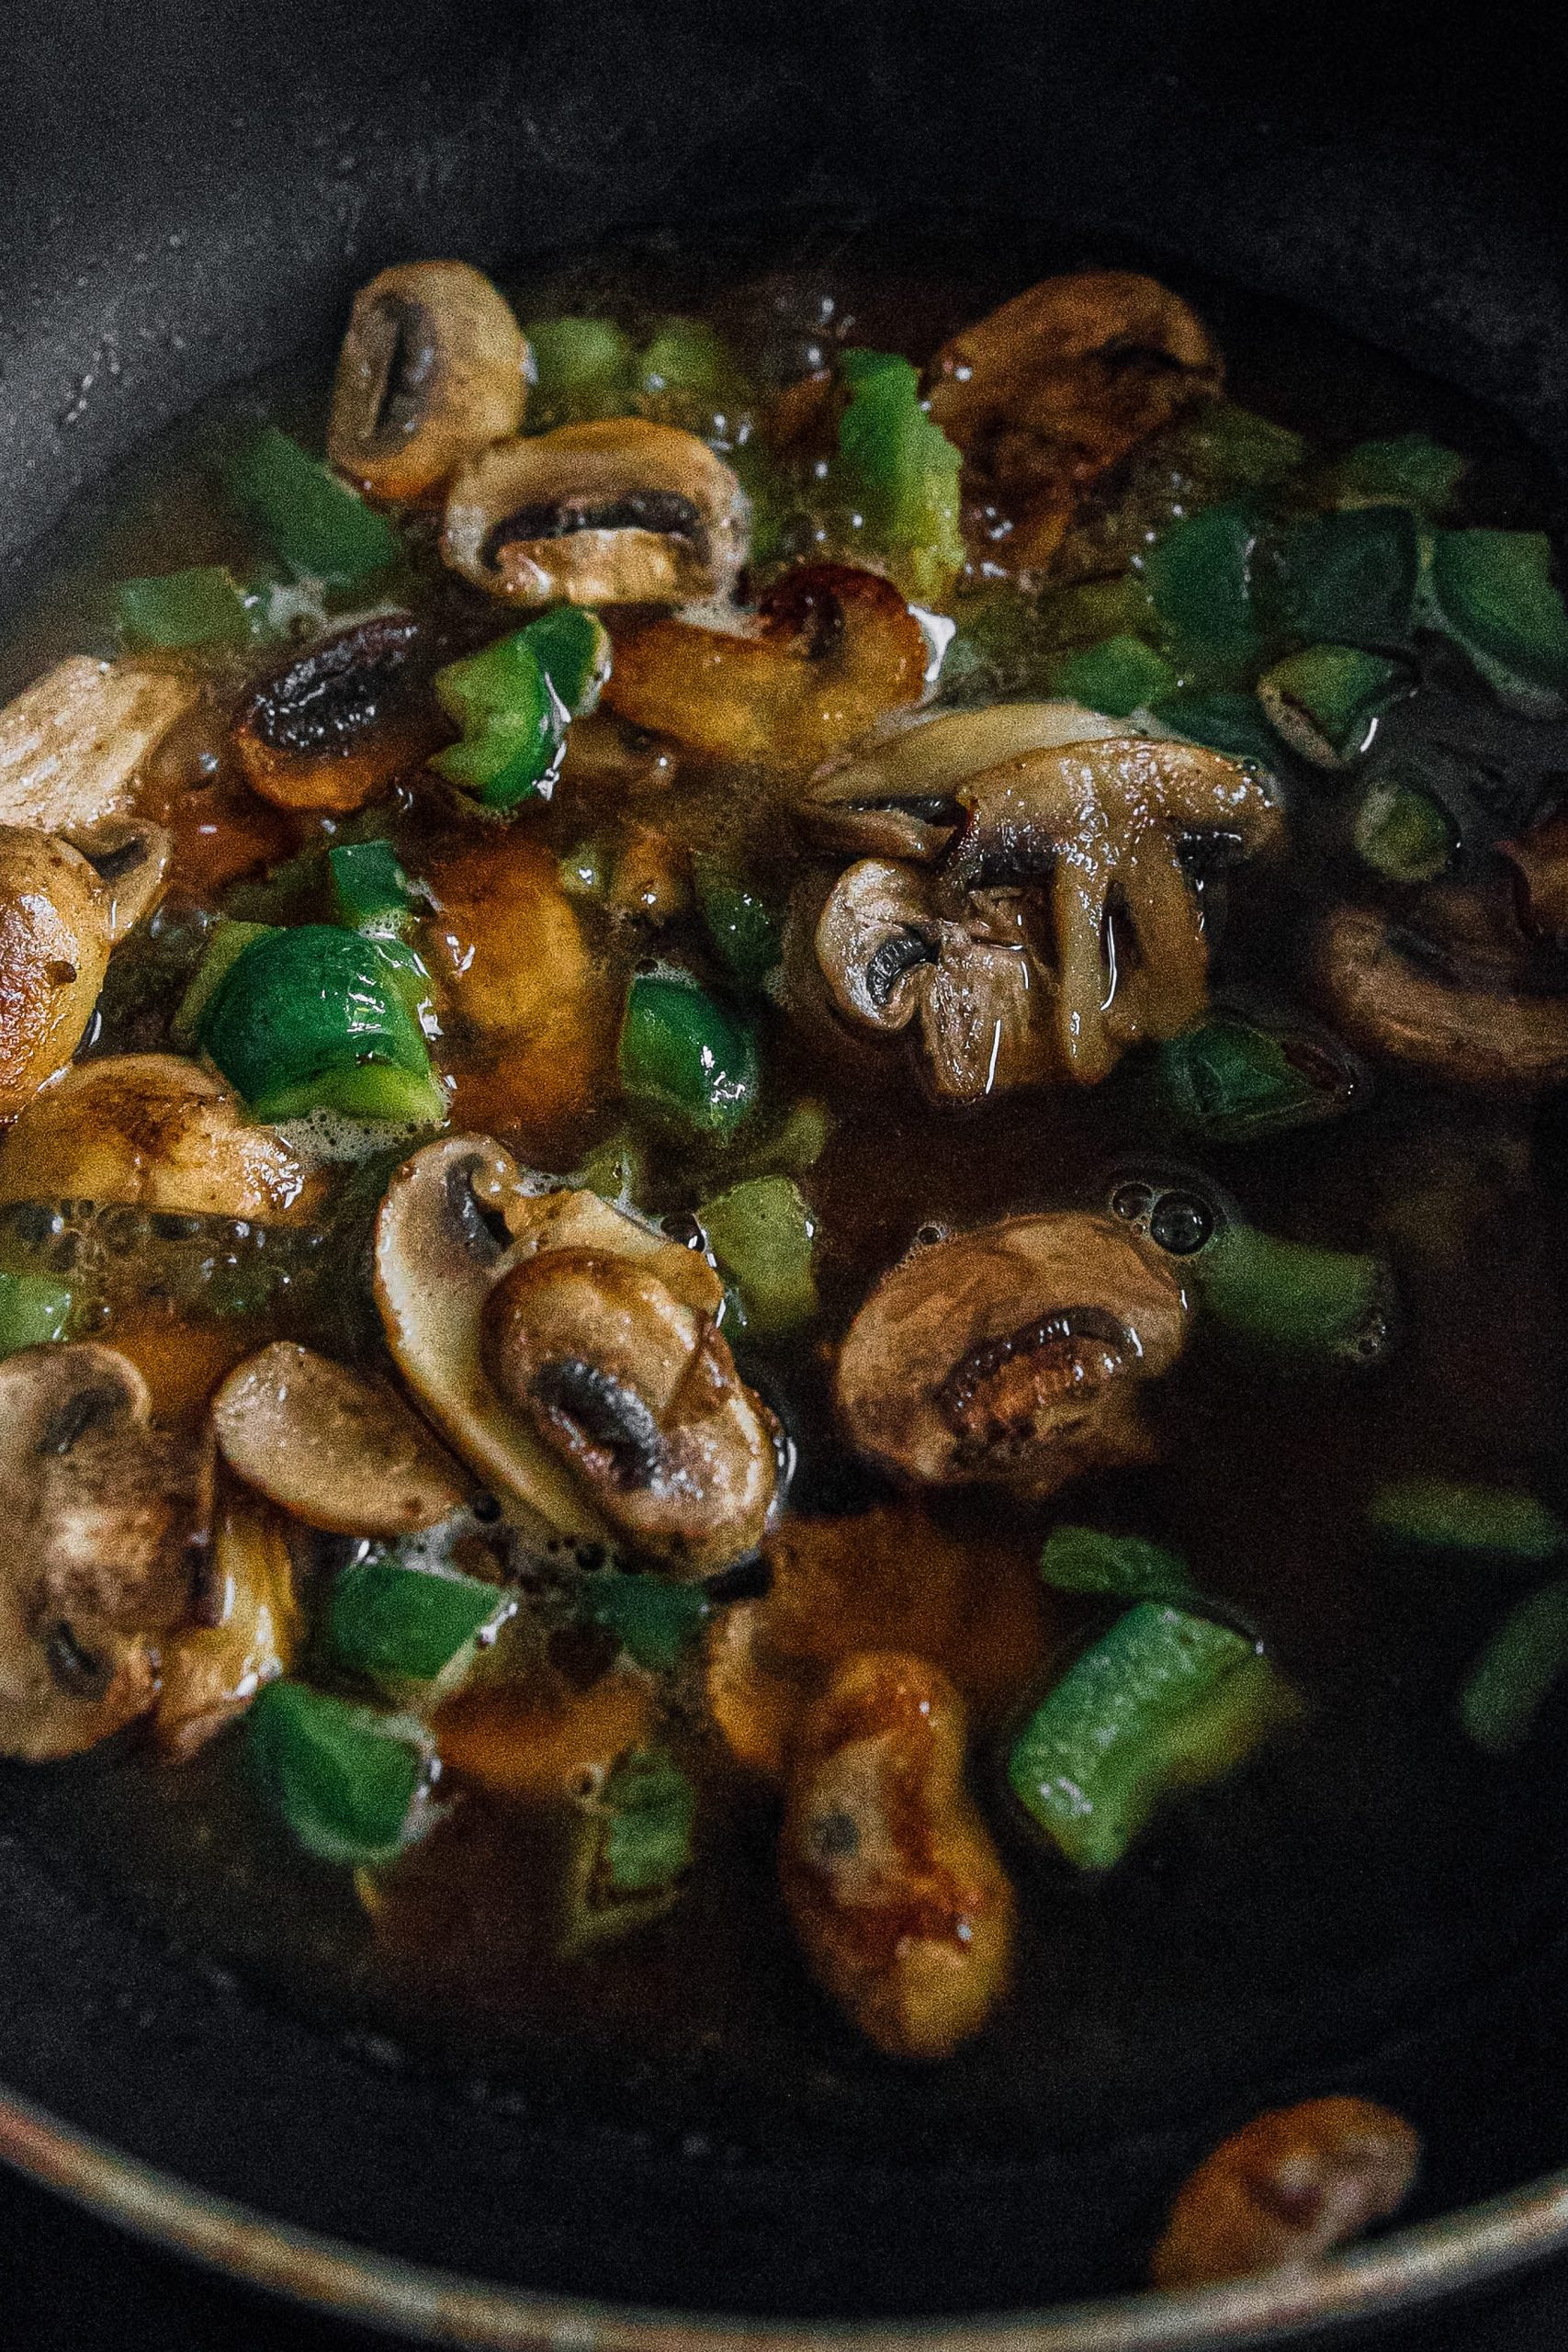  In a large skillet over medium-high heat, melt. Add bell pepper and mushrooms and sauté until tender.